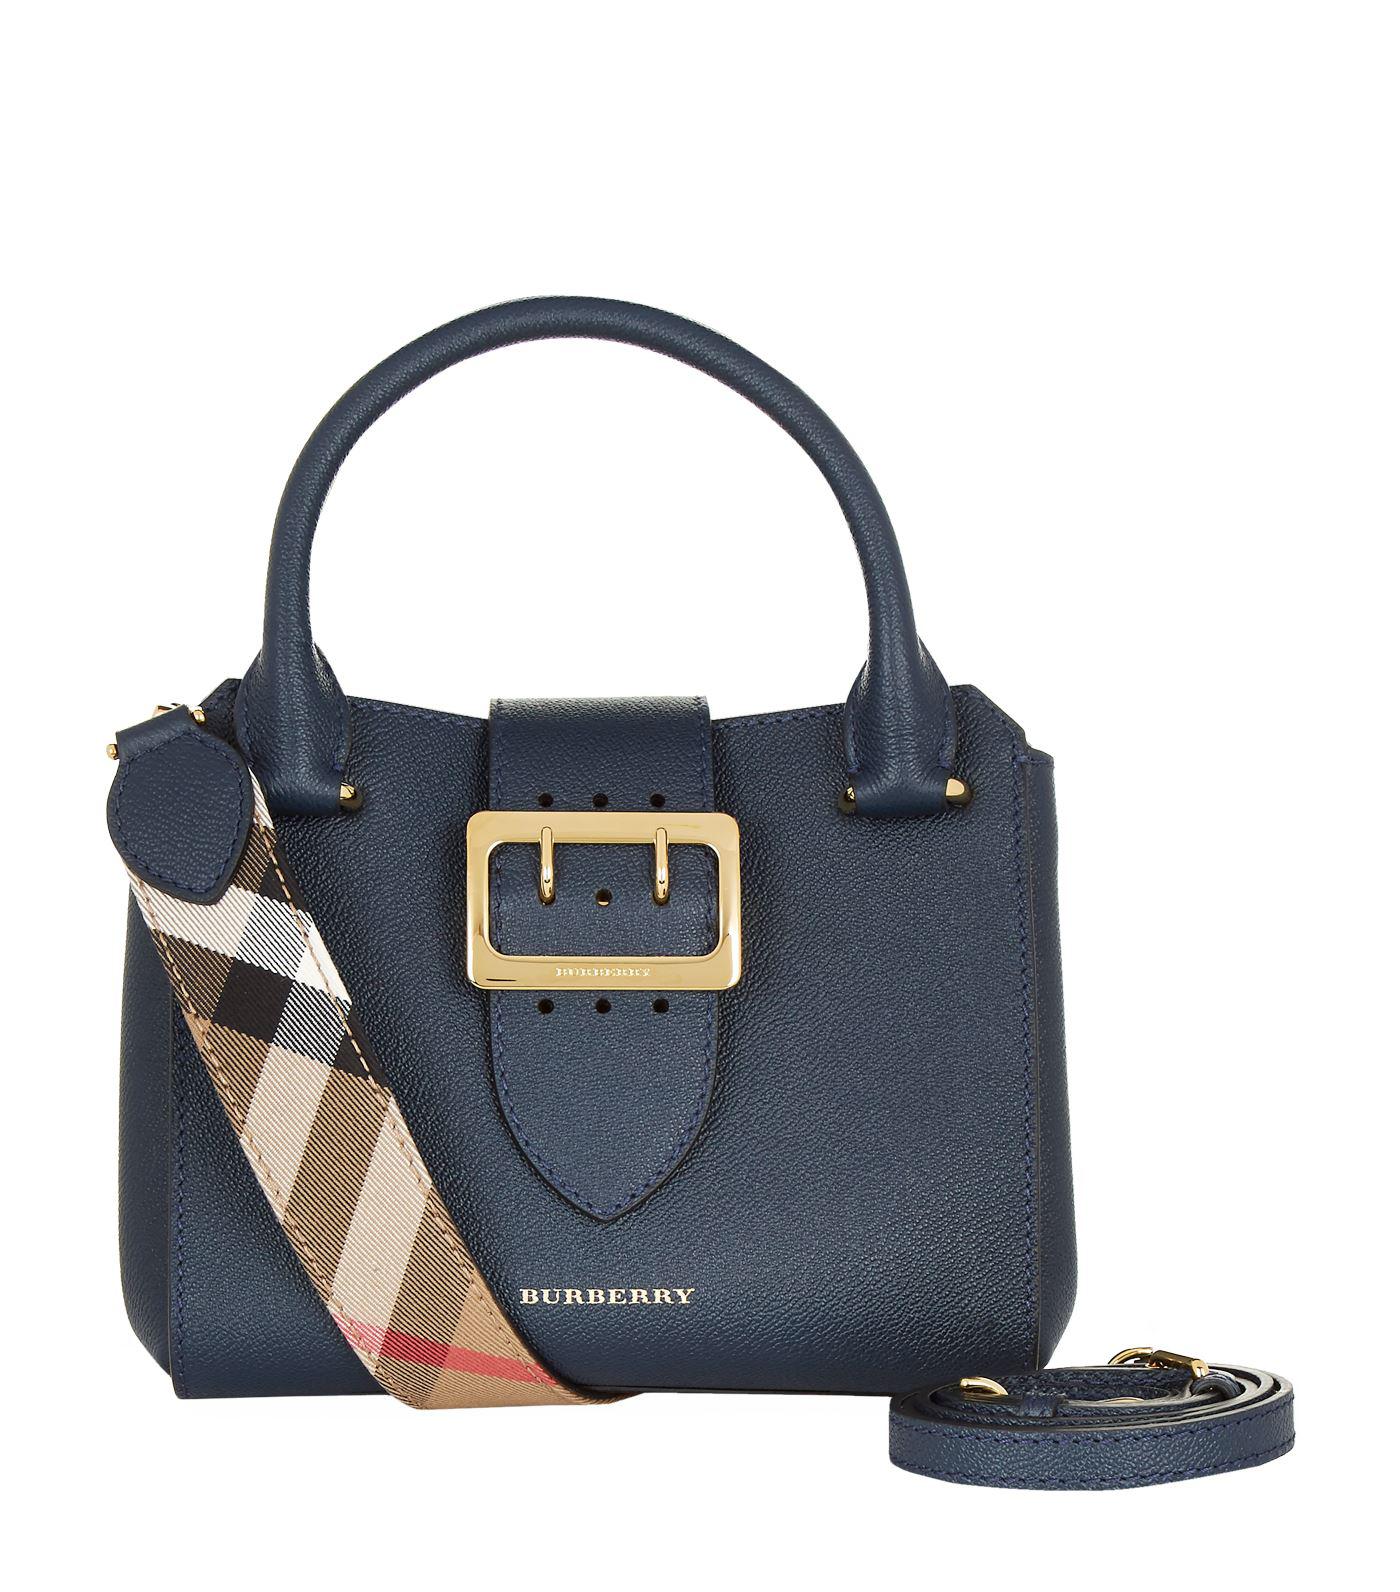 Burberry Small Buckle Tote Sales USA, 48% OFF | irradia.com.es